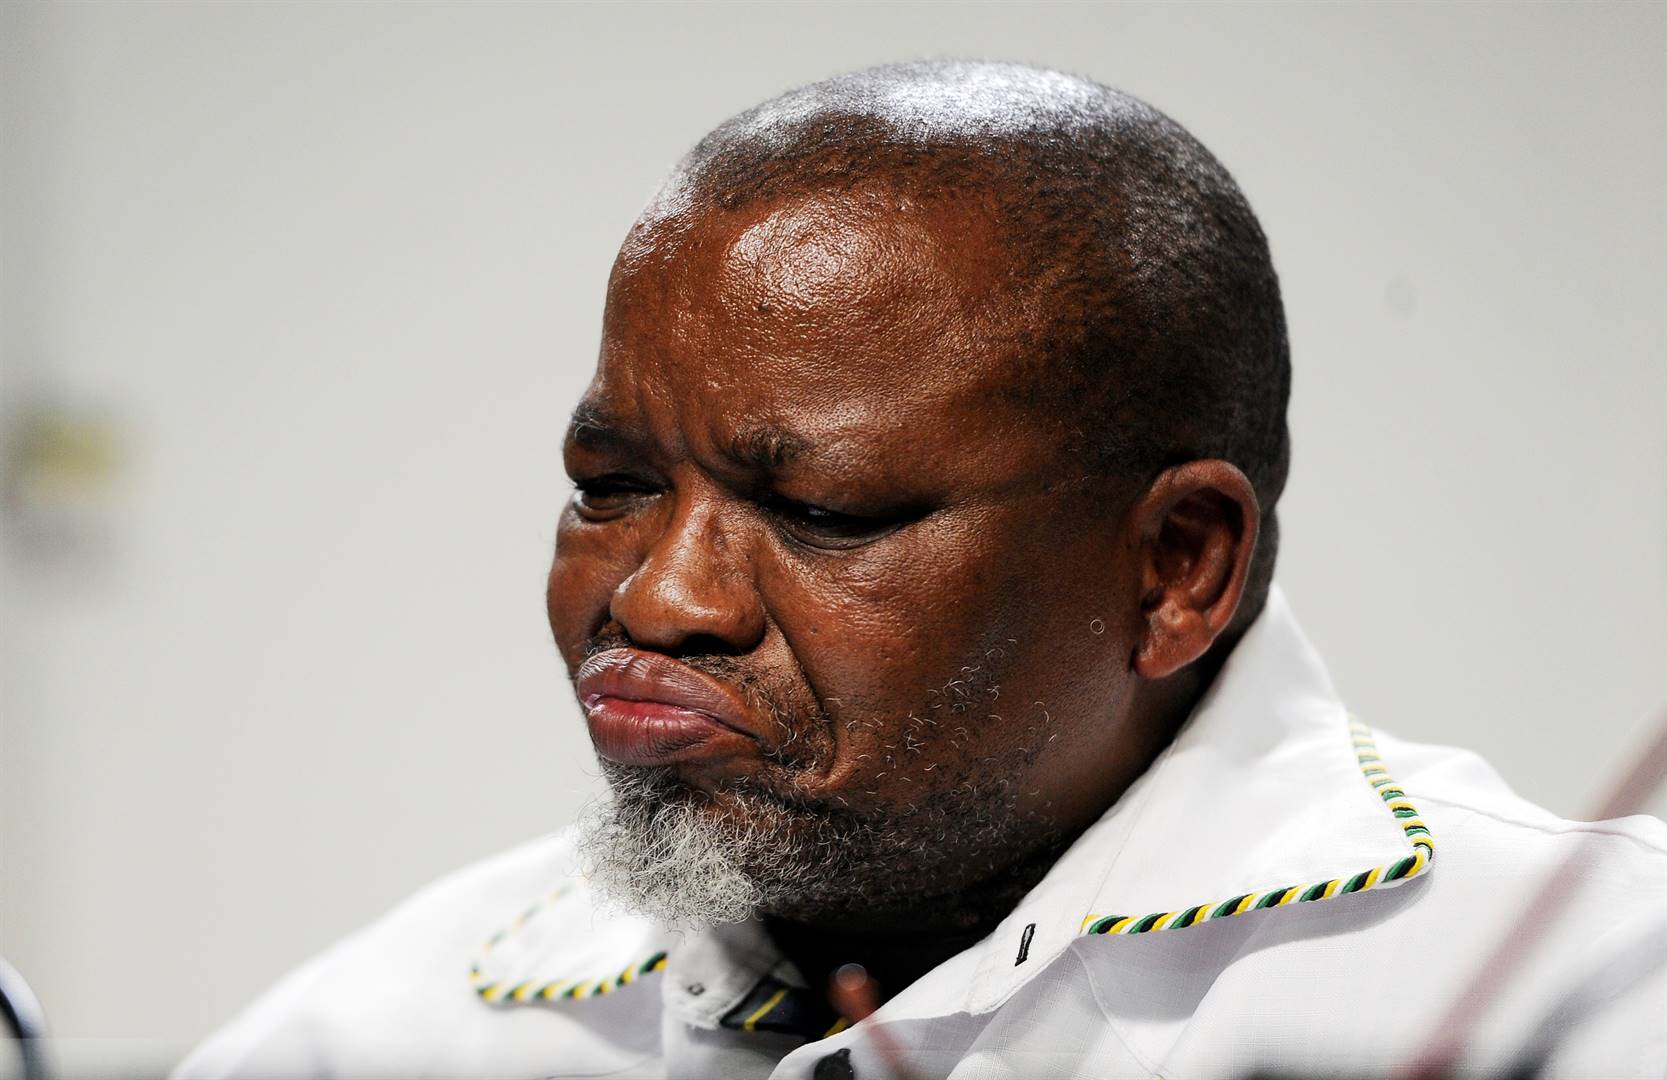 Mineral Resources and Energy Minister Gwede Mantashe, a staunch supporter of fossil fuels, has long criticised civil organisations and their financiers.